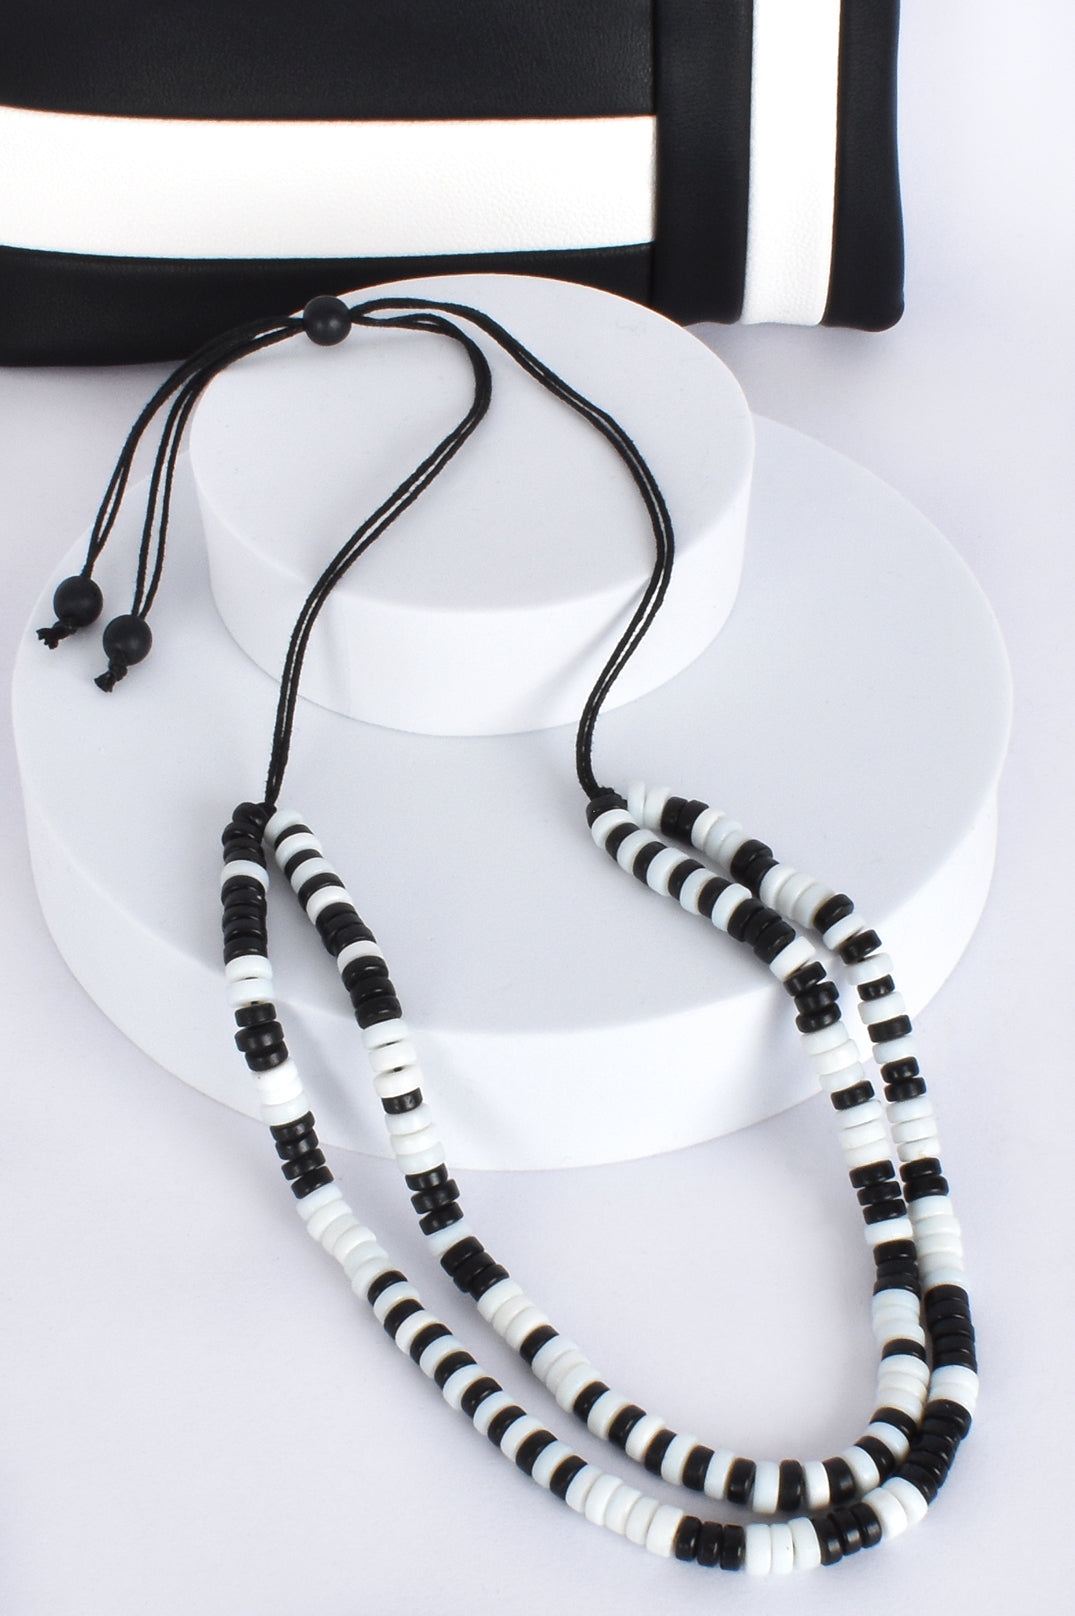 Tallulah Black and White Layered Adjustable Necklace.